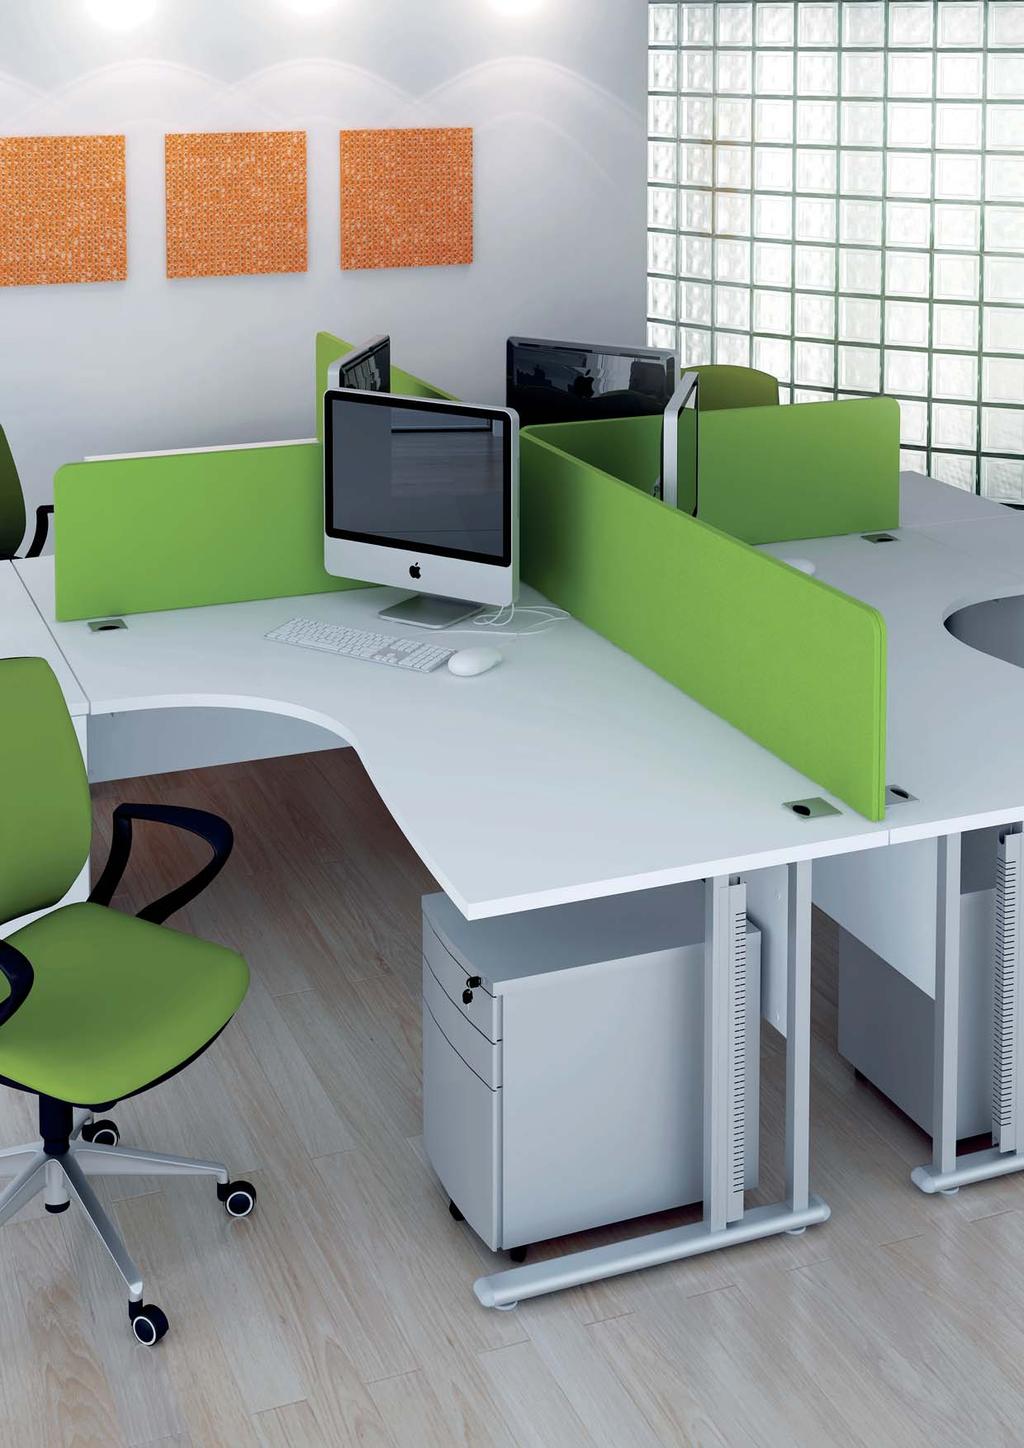 This traditional layout enables the number of desks to be increase or decreased as the business changes.